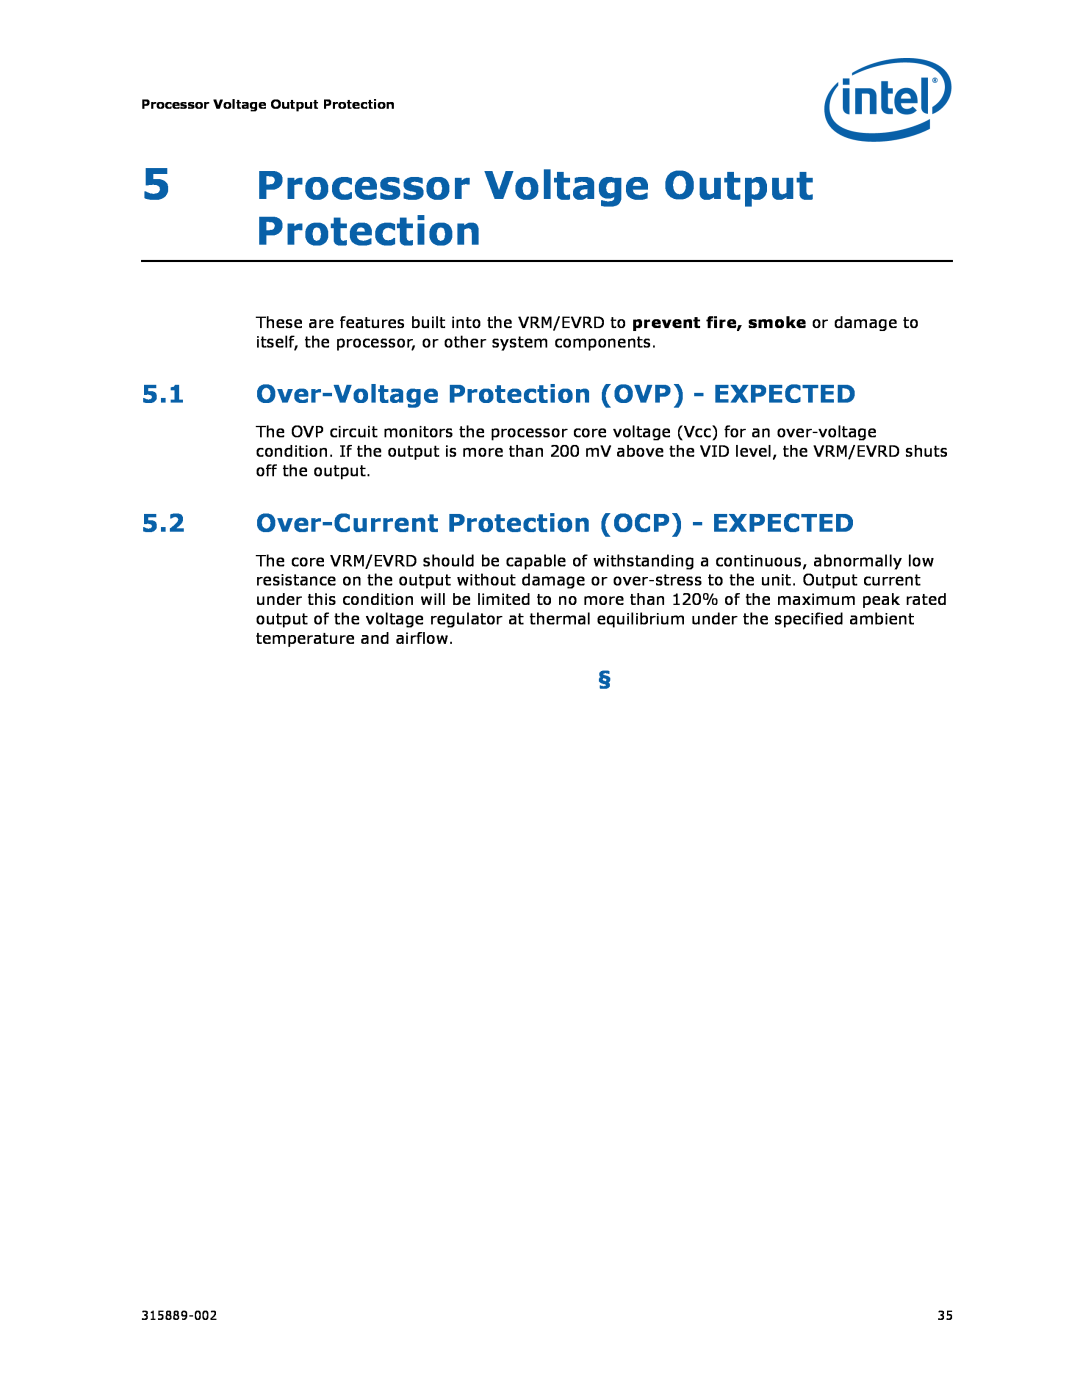 Intel 315889-002 manual 5Processor Voltage Output Protection, 5.1Over-VoltageProtection OVP - EXPECTED 